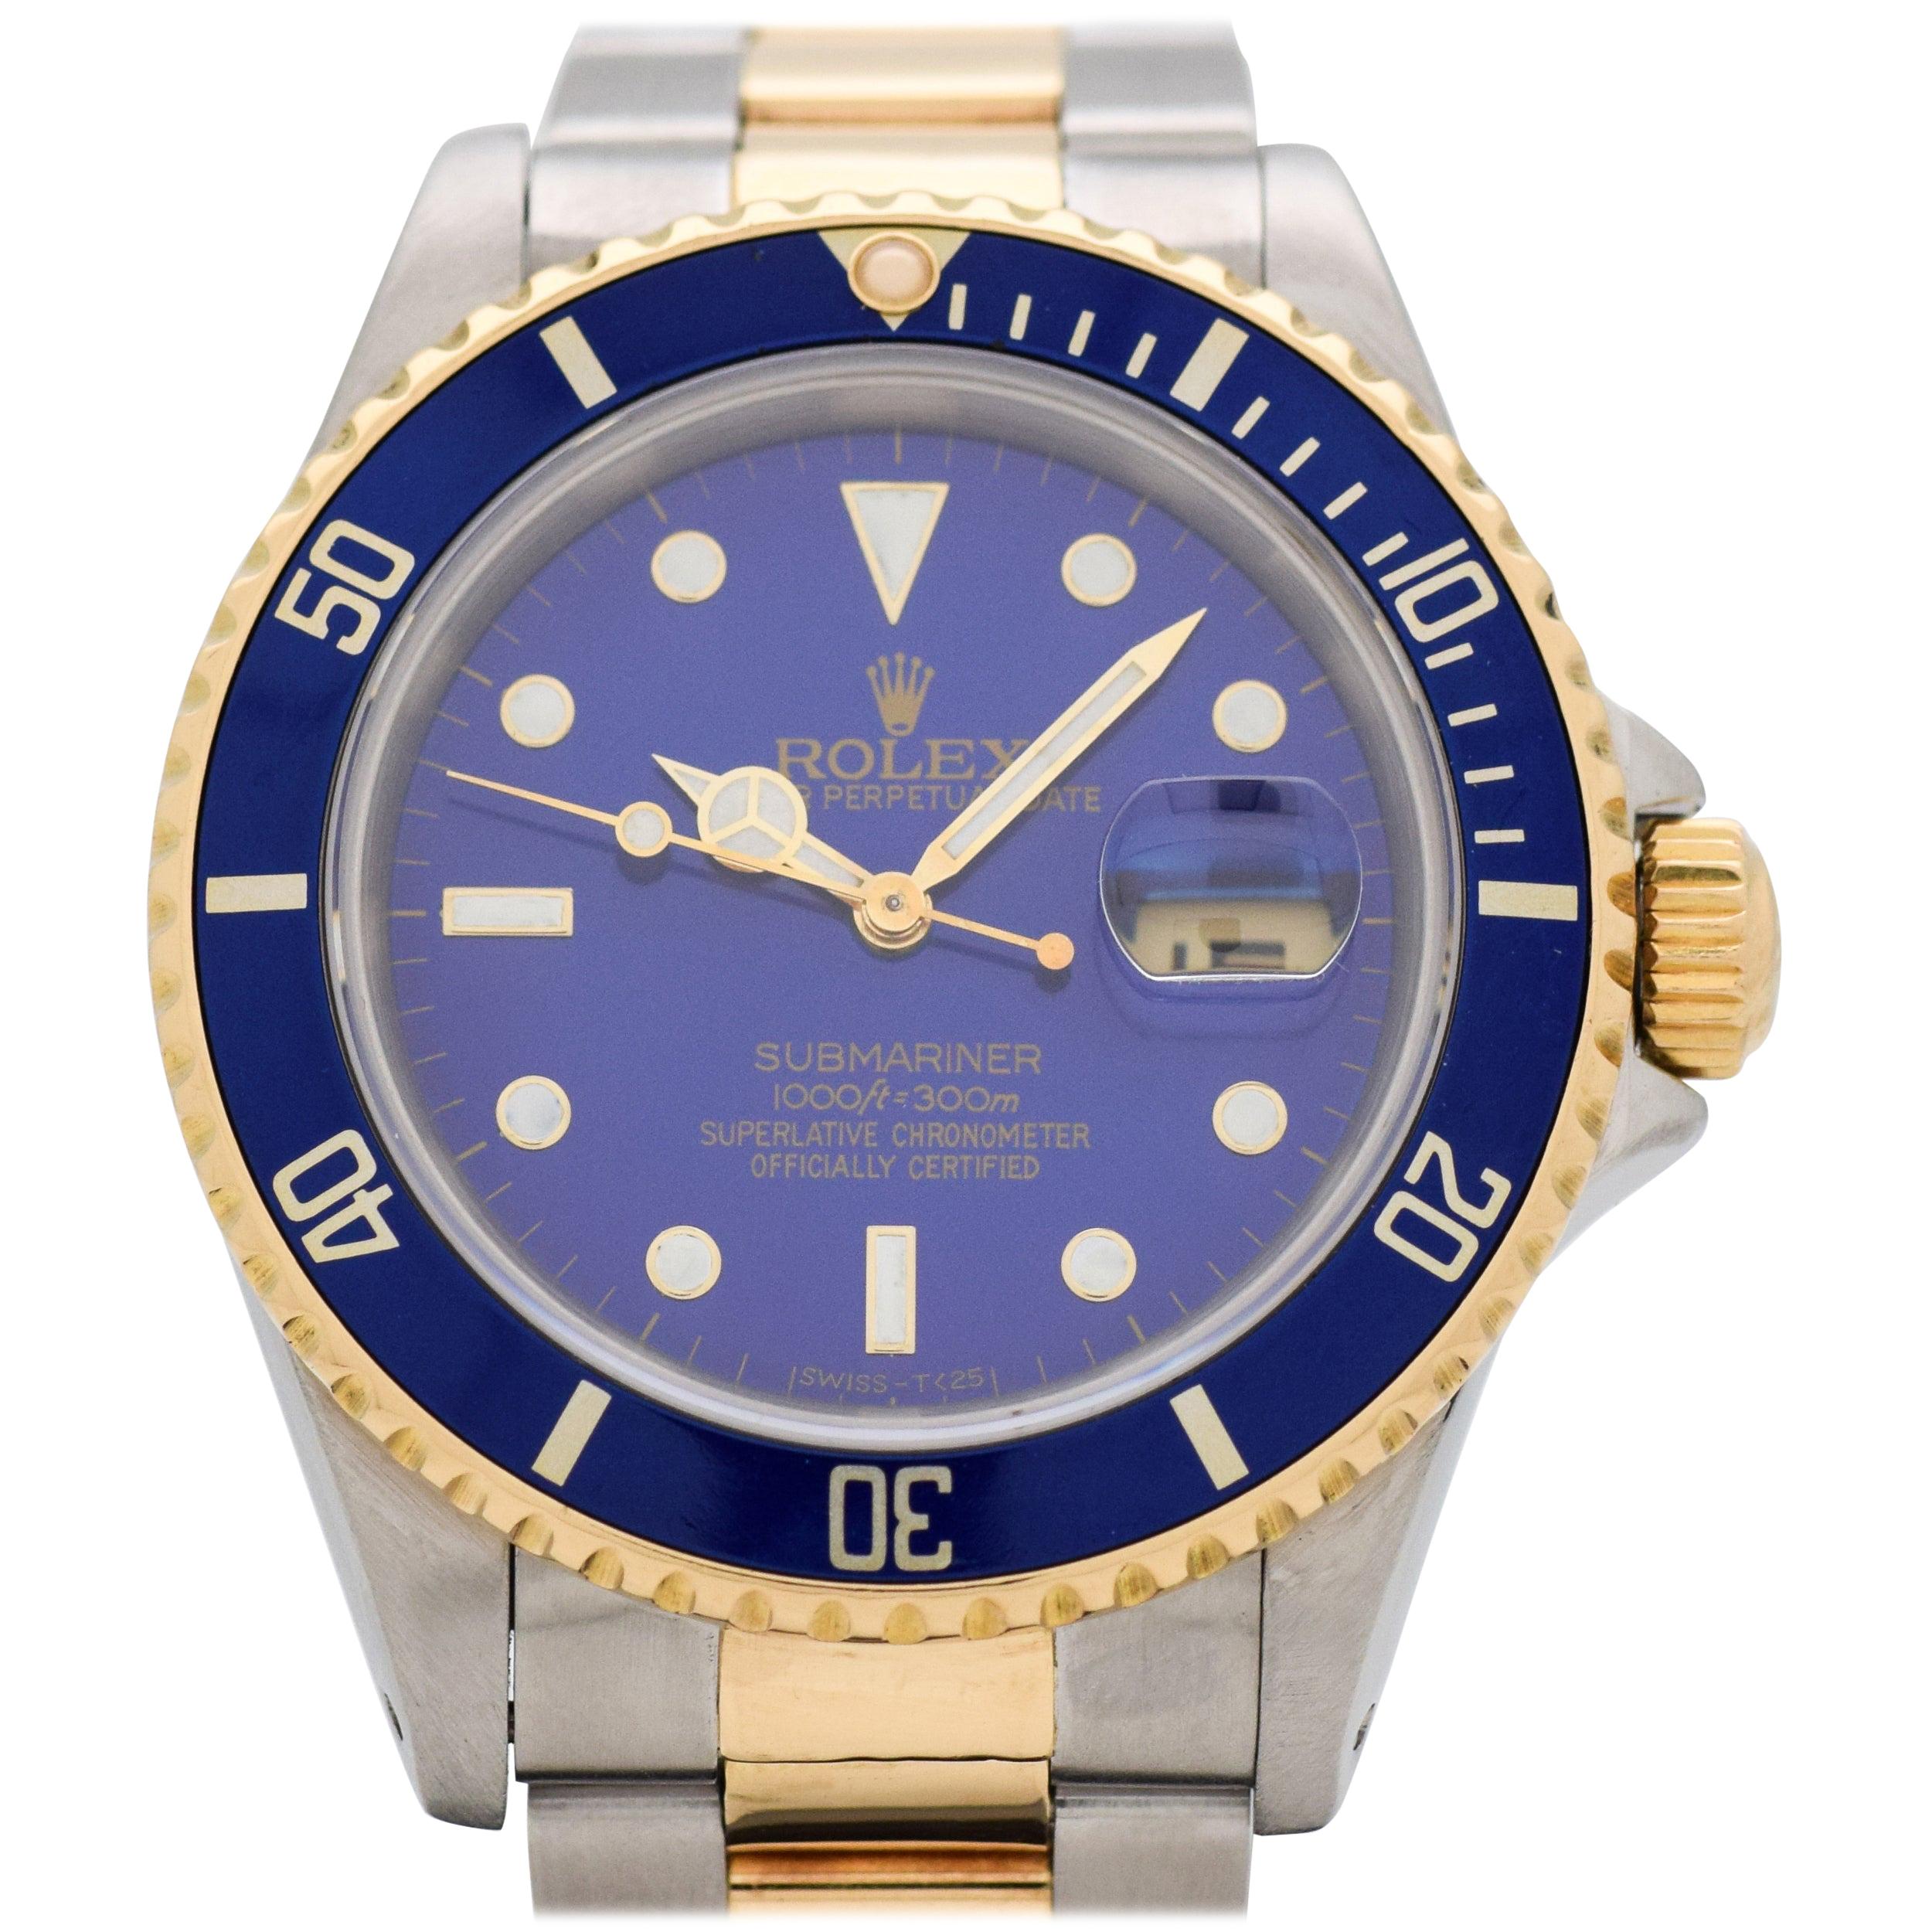 Vintage Rolex Blue Submariner Reference 16613 Two-Tone Watch, 1989